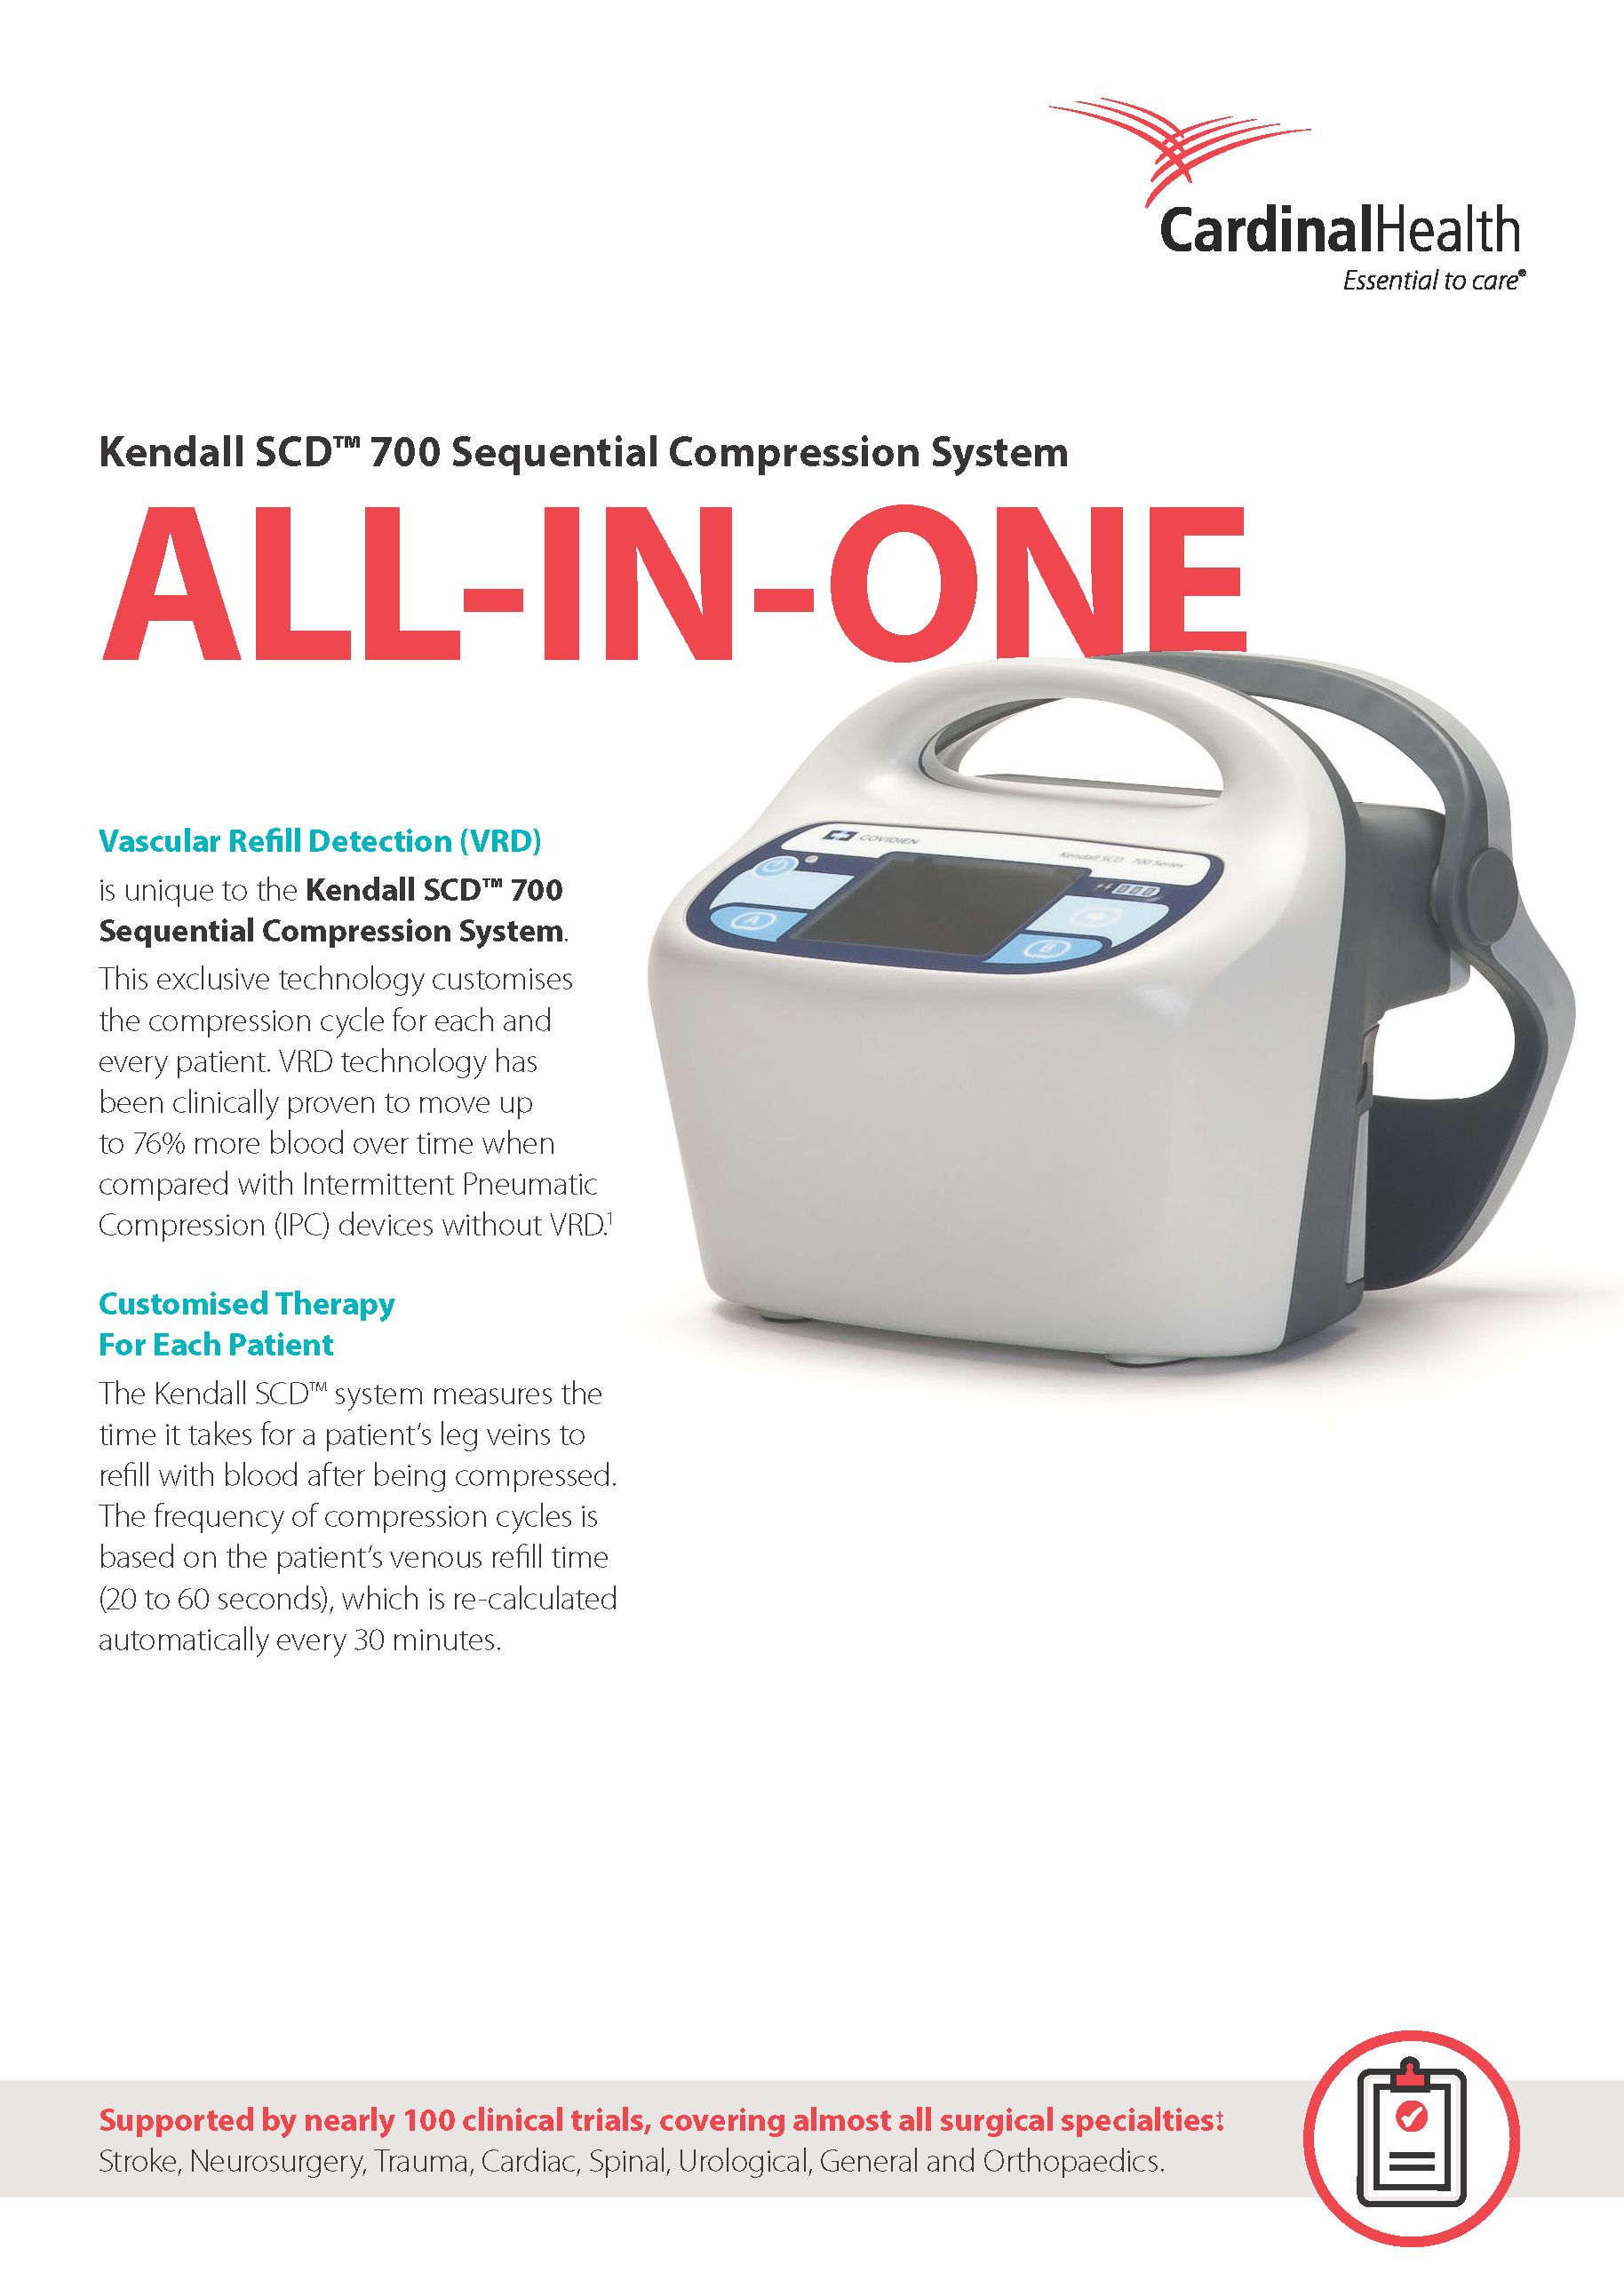 Kendall Compression System from Cardinal Health